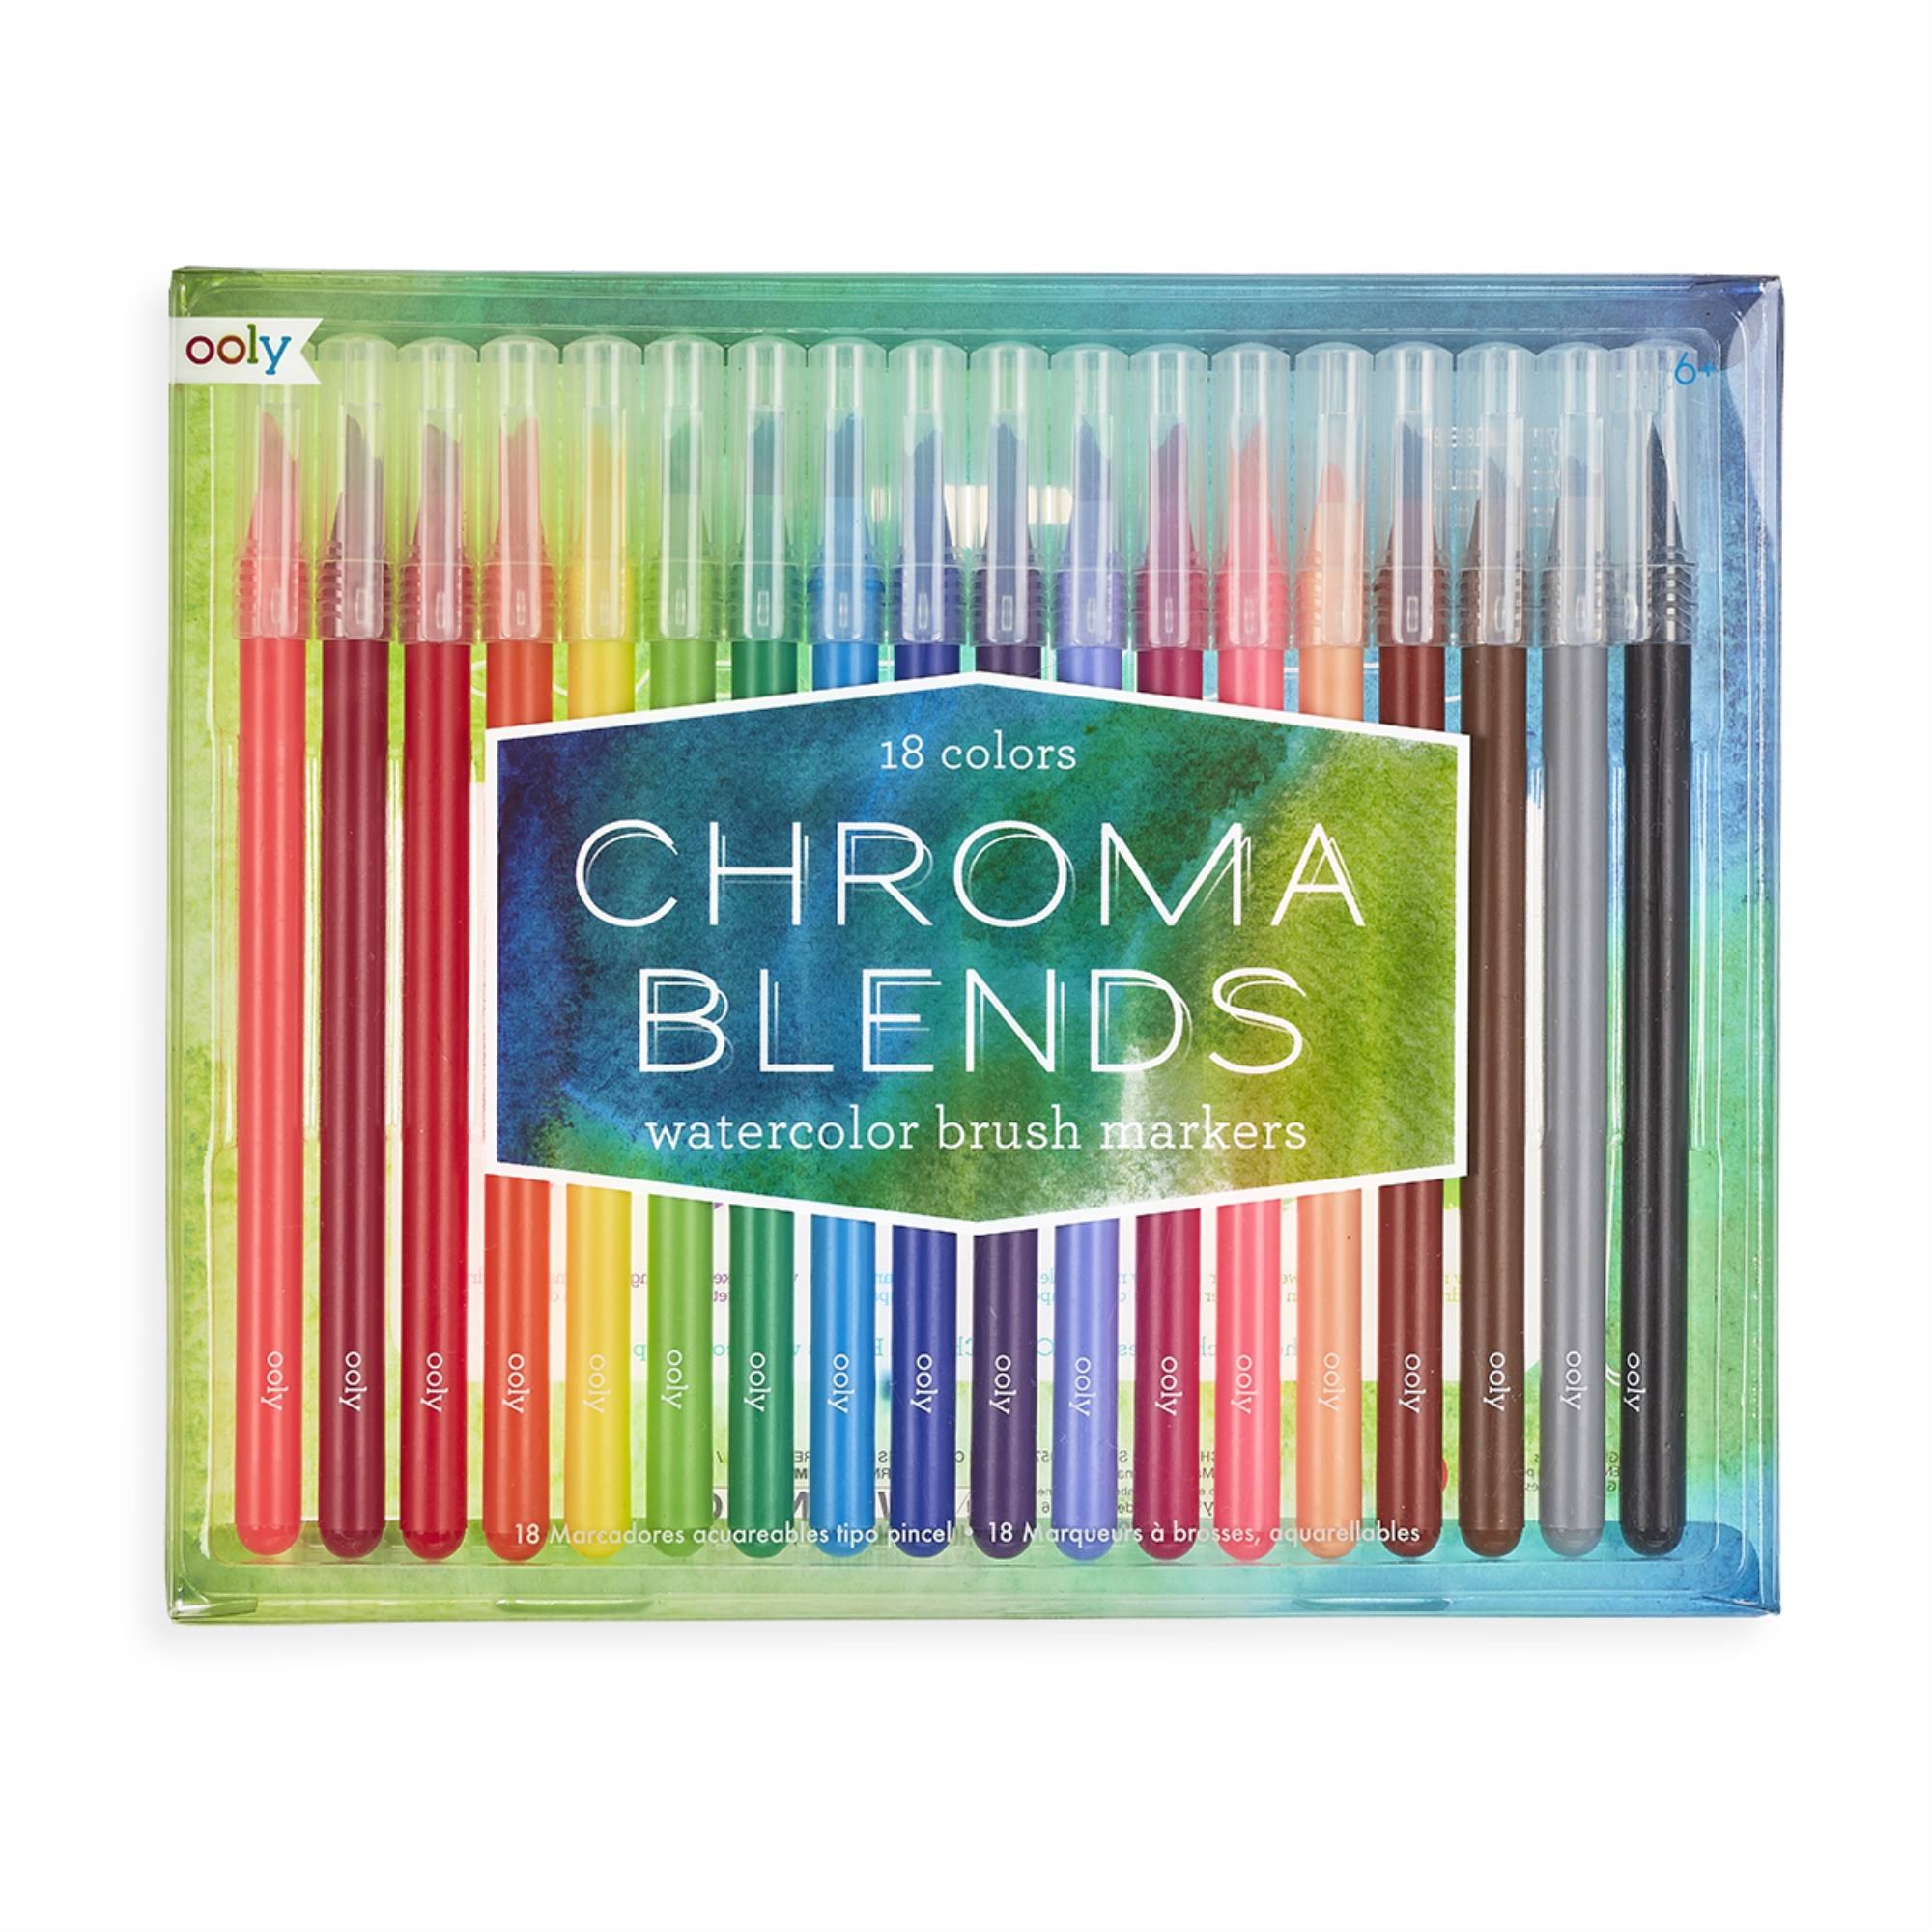 Ooly Chroma Blends Watercolor Brush Markers - Set Of 18